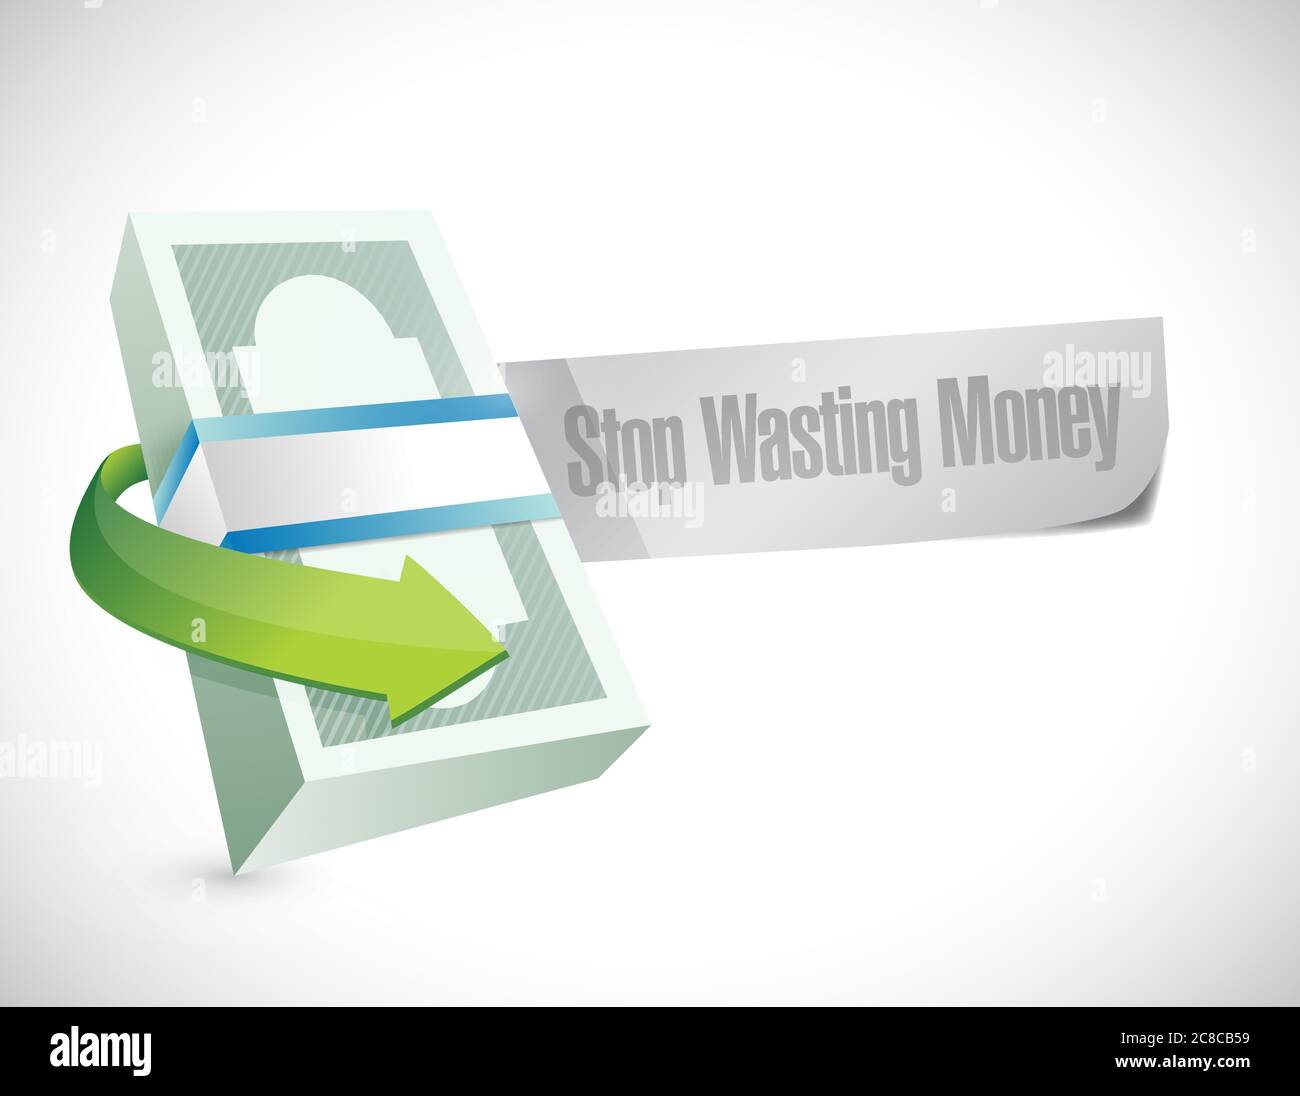 Stop wasting money message sign illustration design over a white background Stock Vector